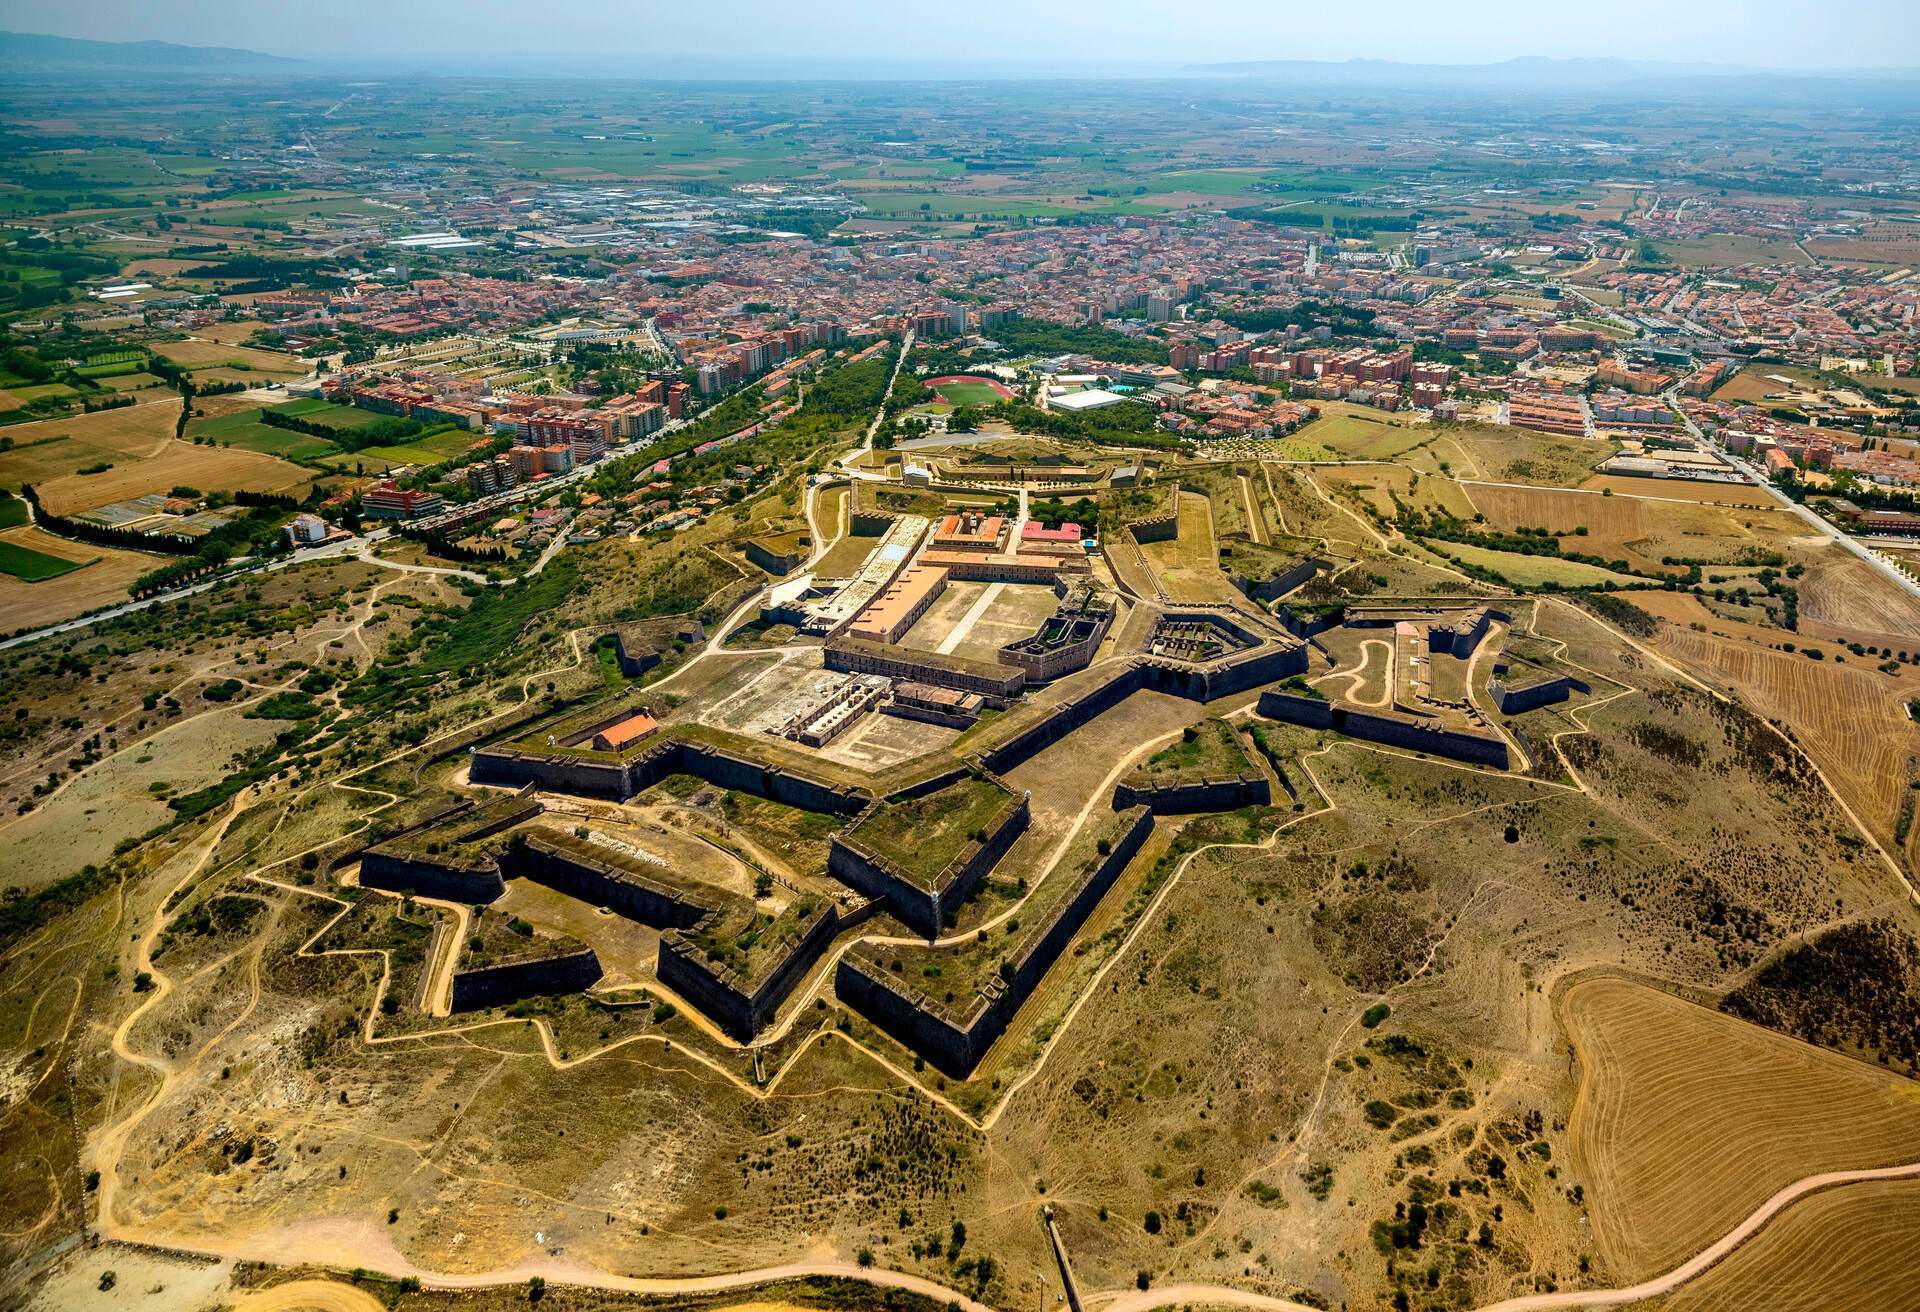 A large military fortress with bastions situated atop a hill with views of the entire city.